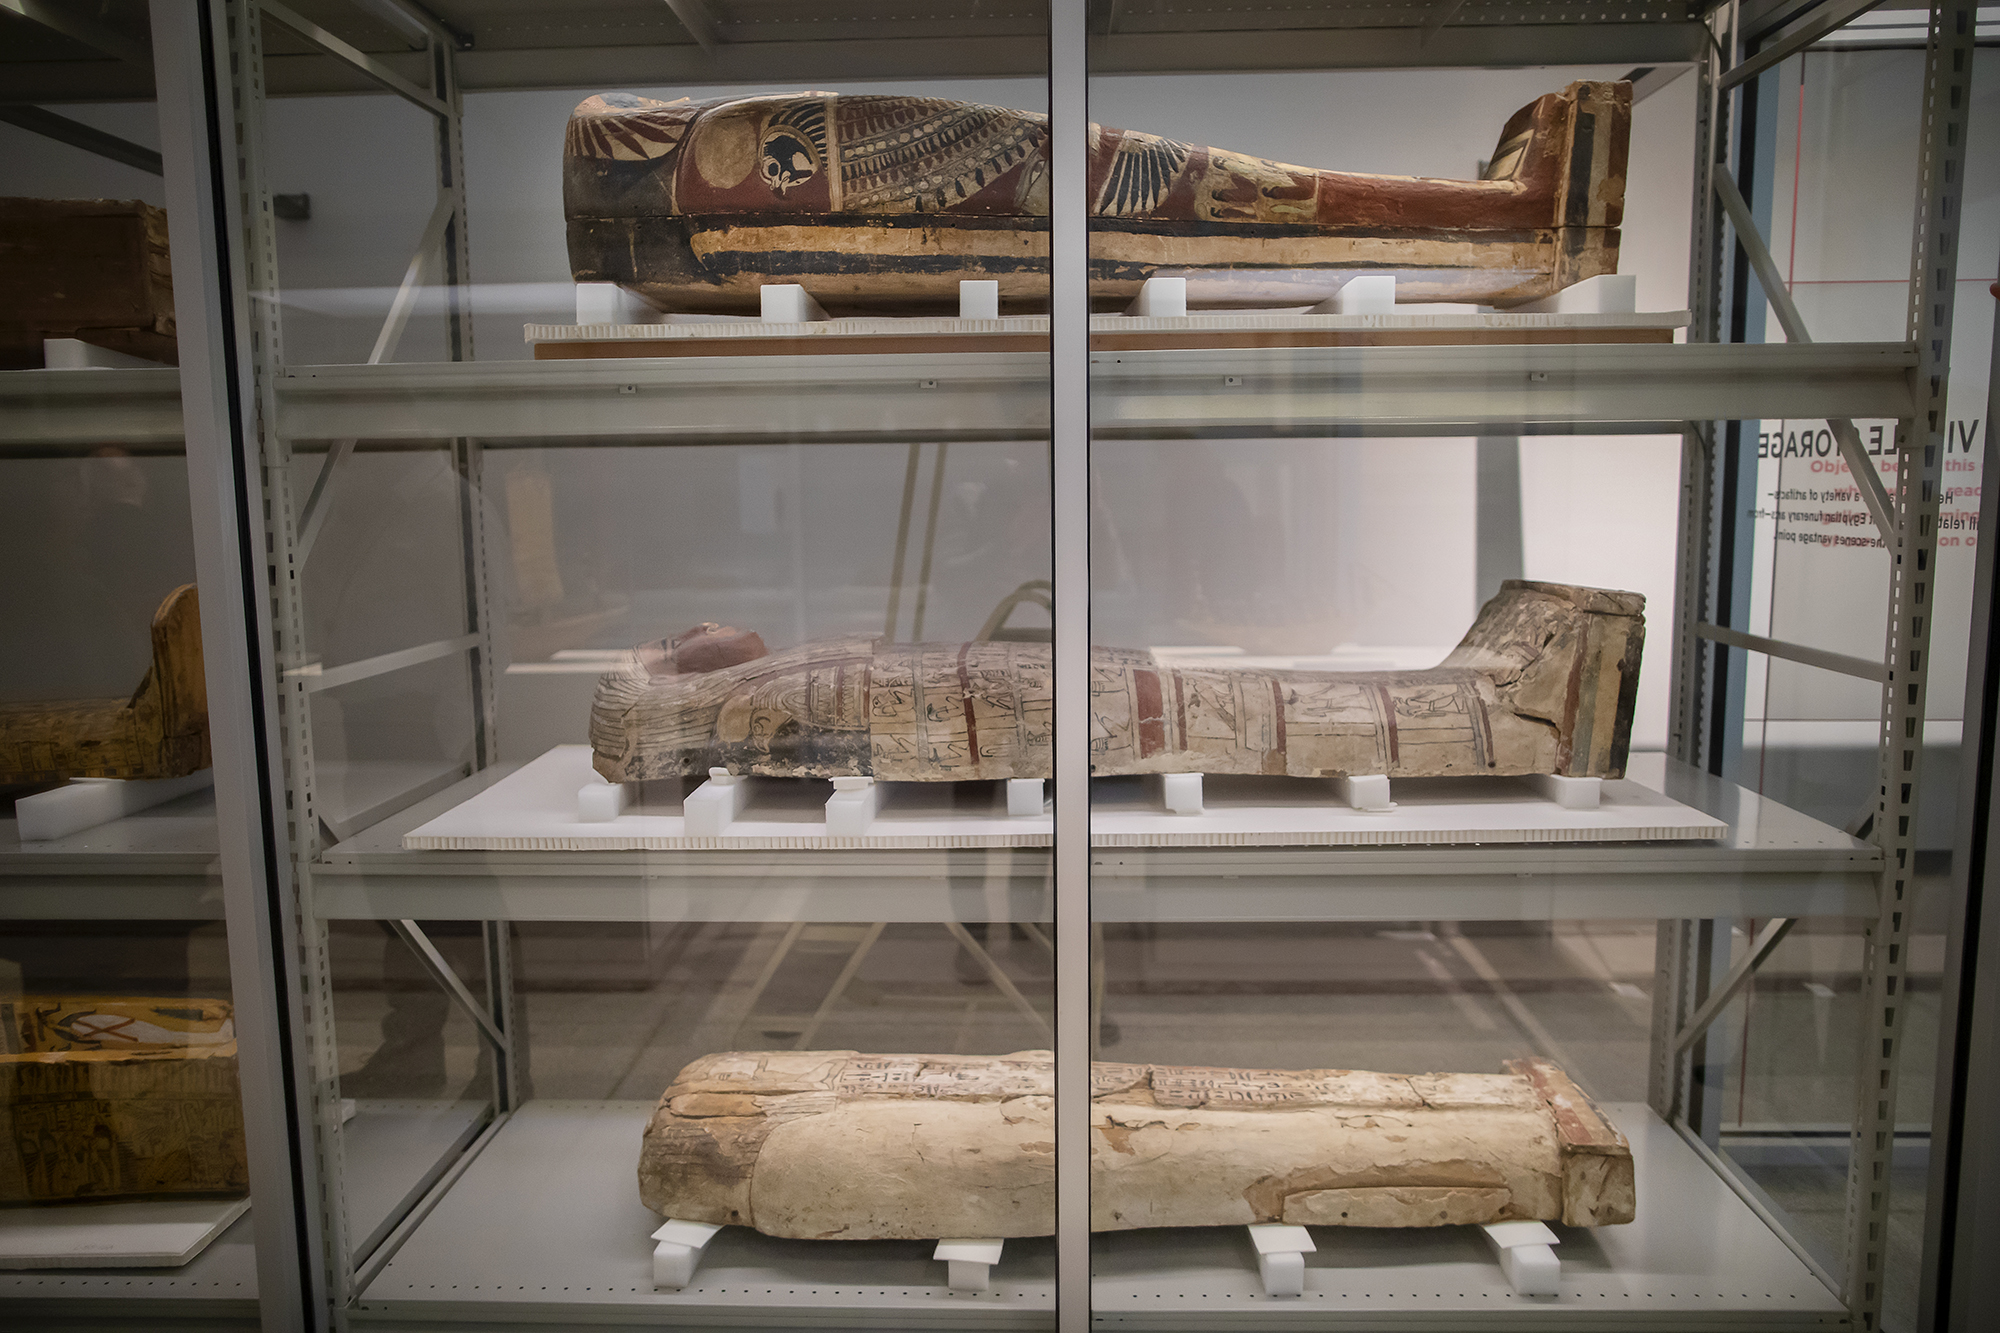 Three Egyptian coffins are displayed on shelves.